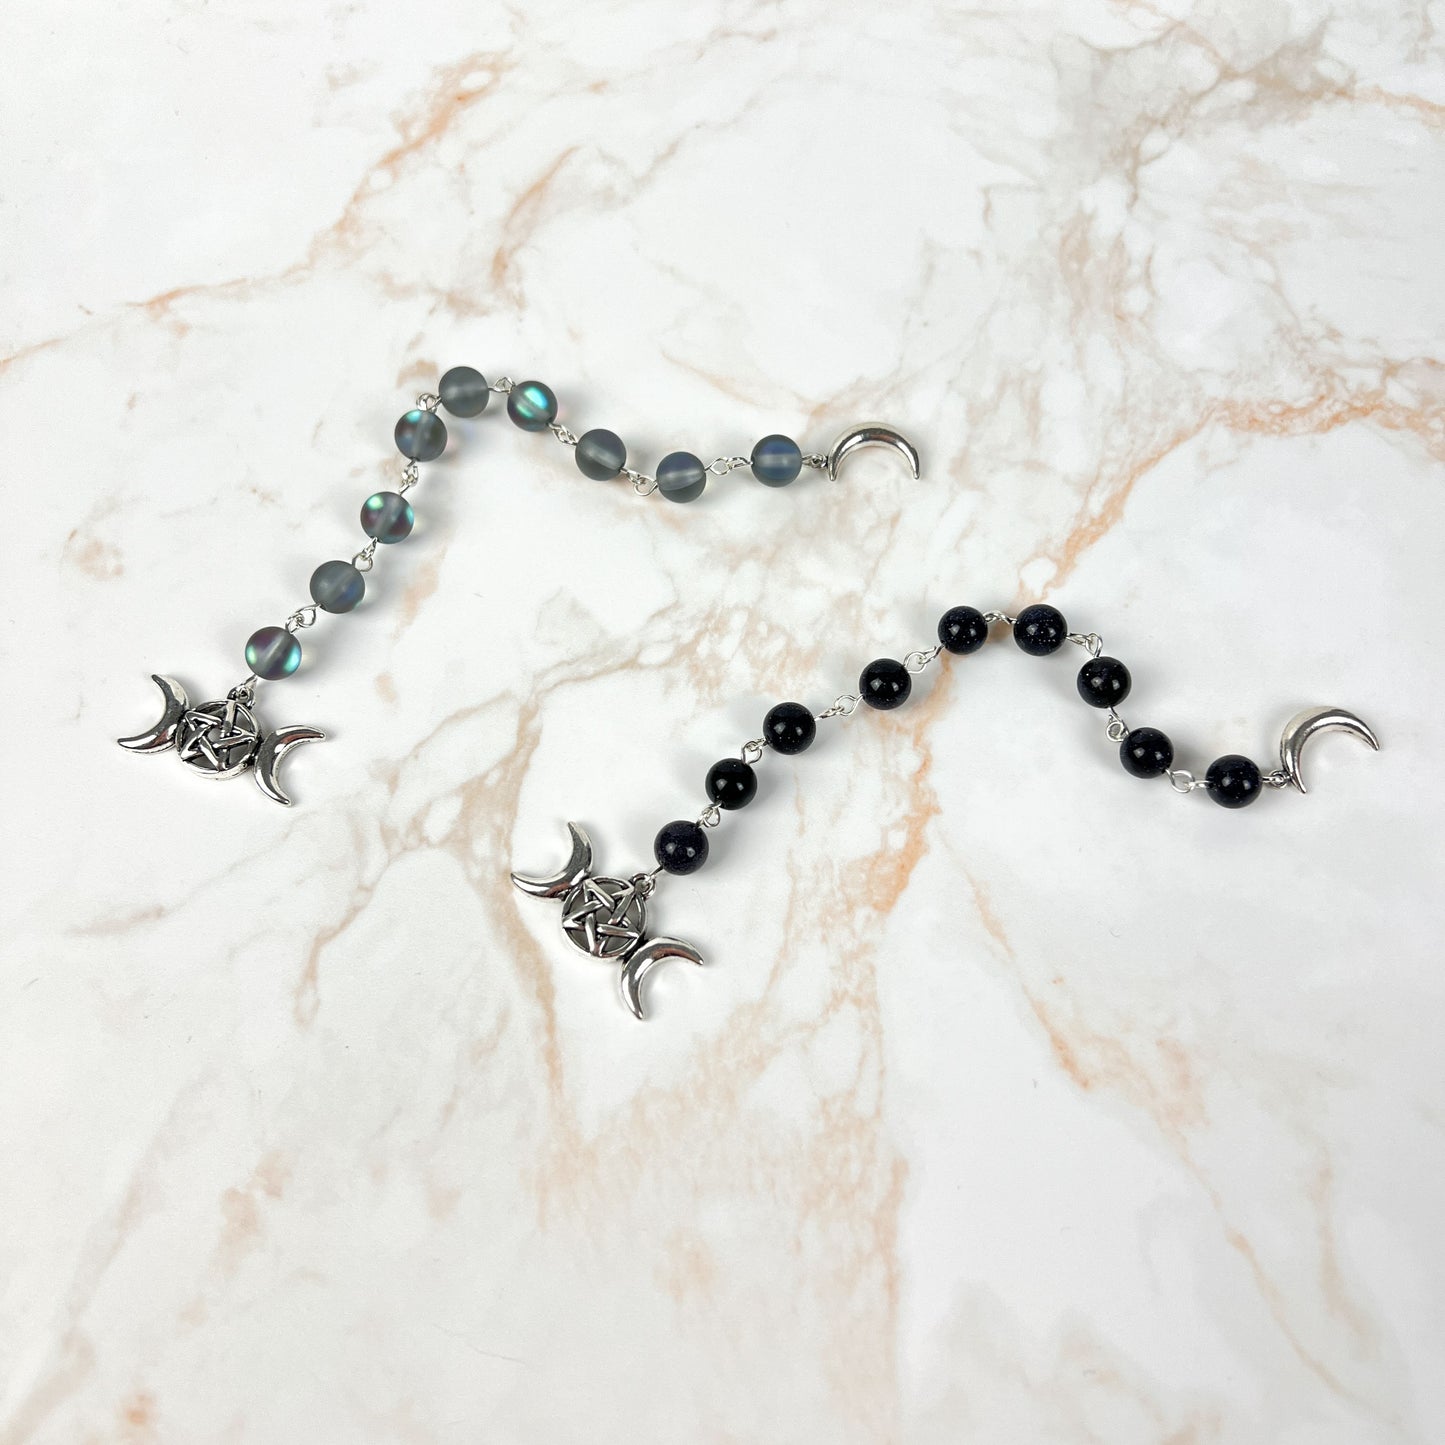 Witch ladder, Mermaid glass or Blue sandstone, Crescent Moon, triple Moon, 9 beads Baguette Magick